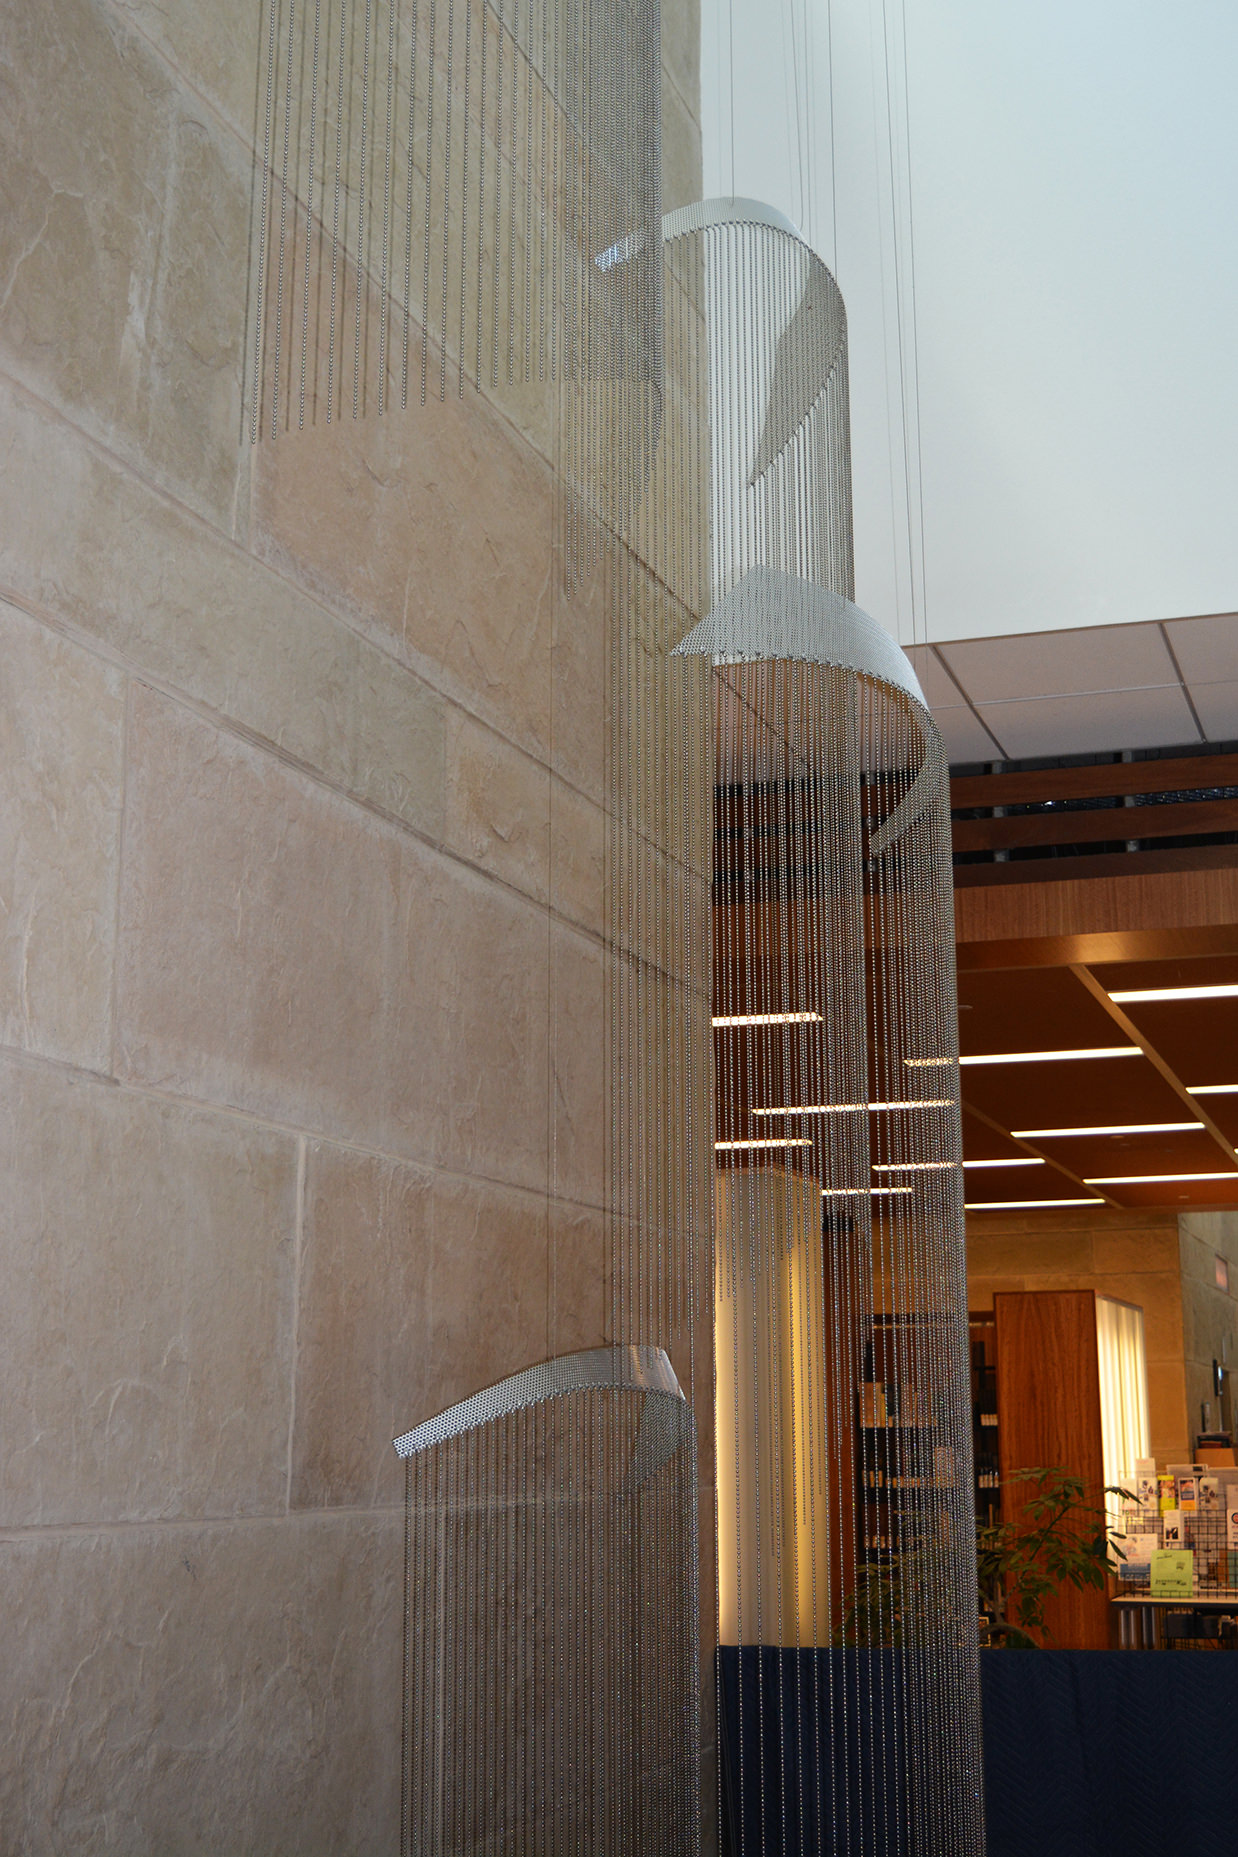 Soft Rains suspended sculpture by Talley Fisher at Mount Prospect Public Library